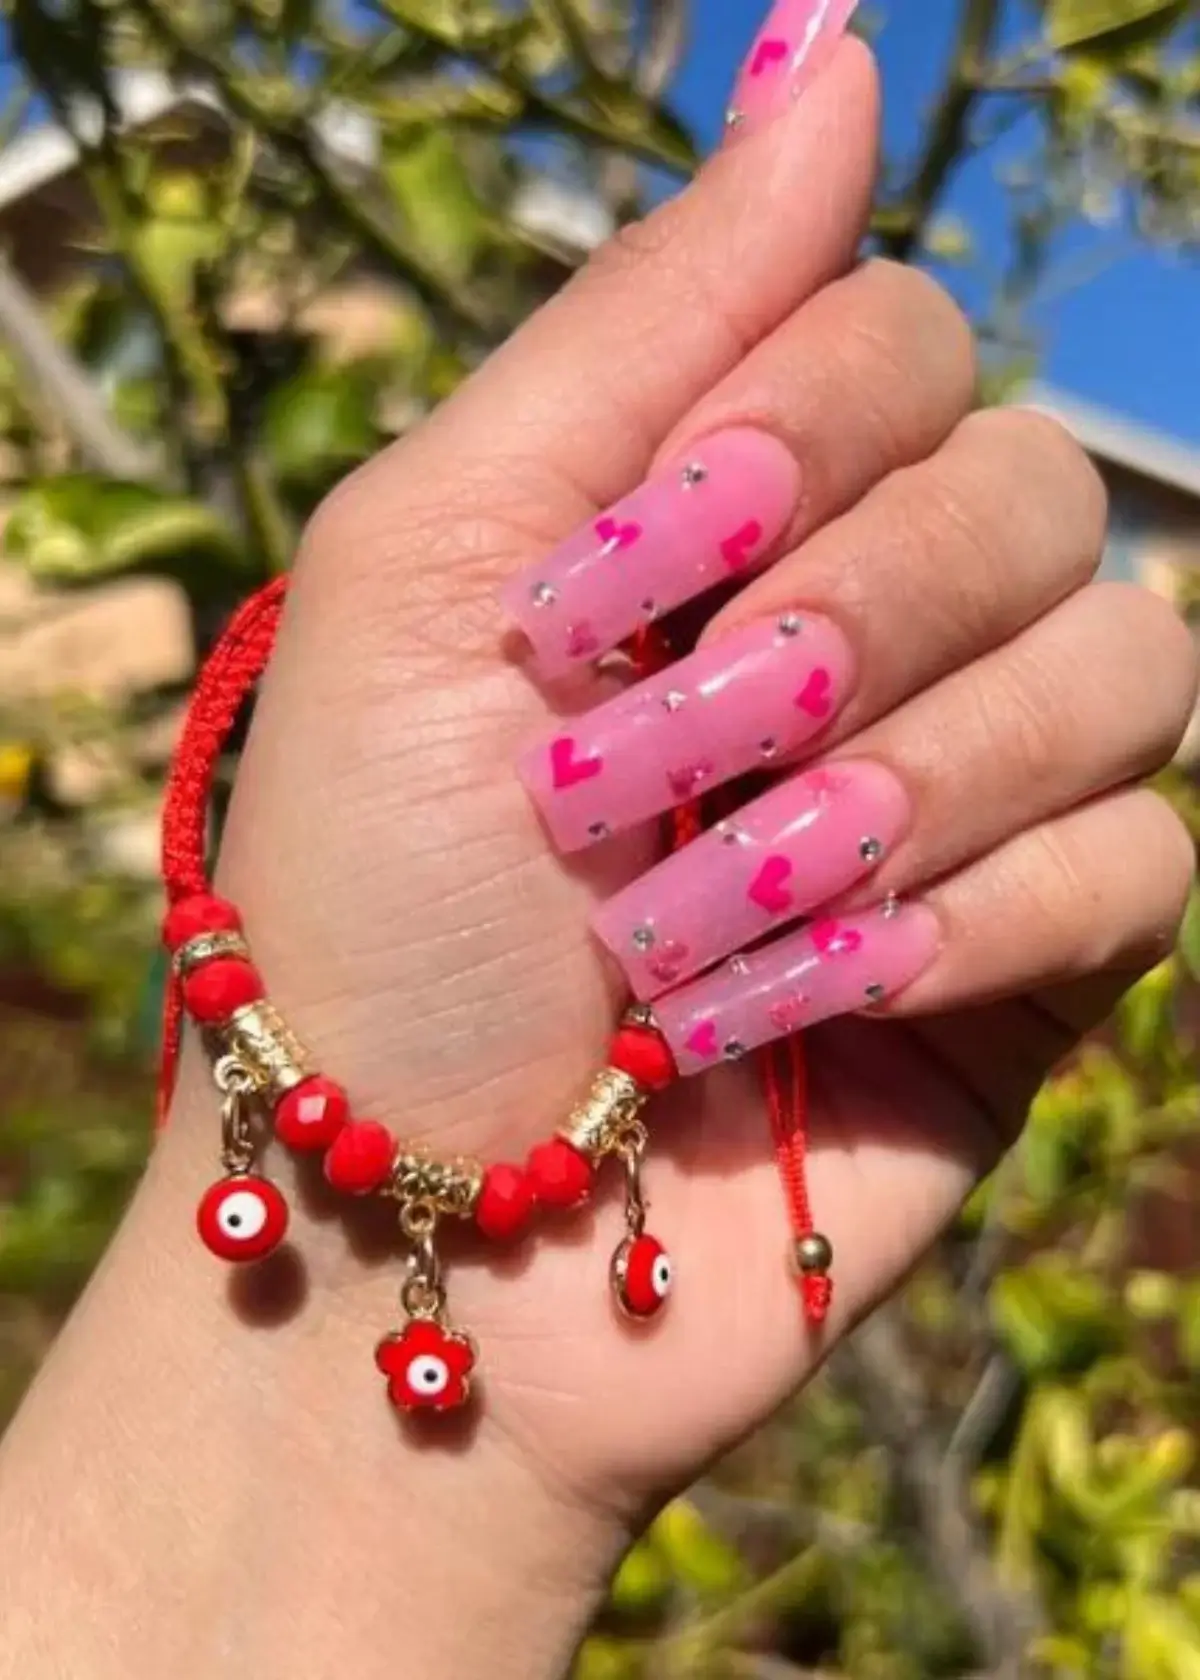 What materials are commonly used to make red Mexican bracelets?